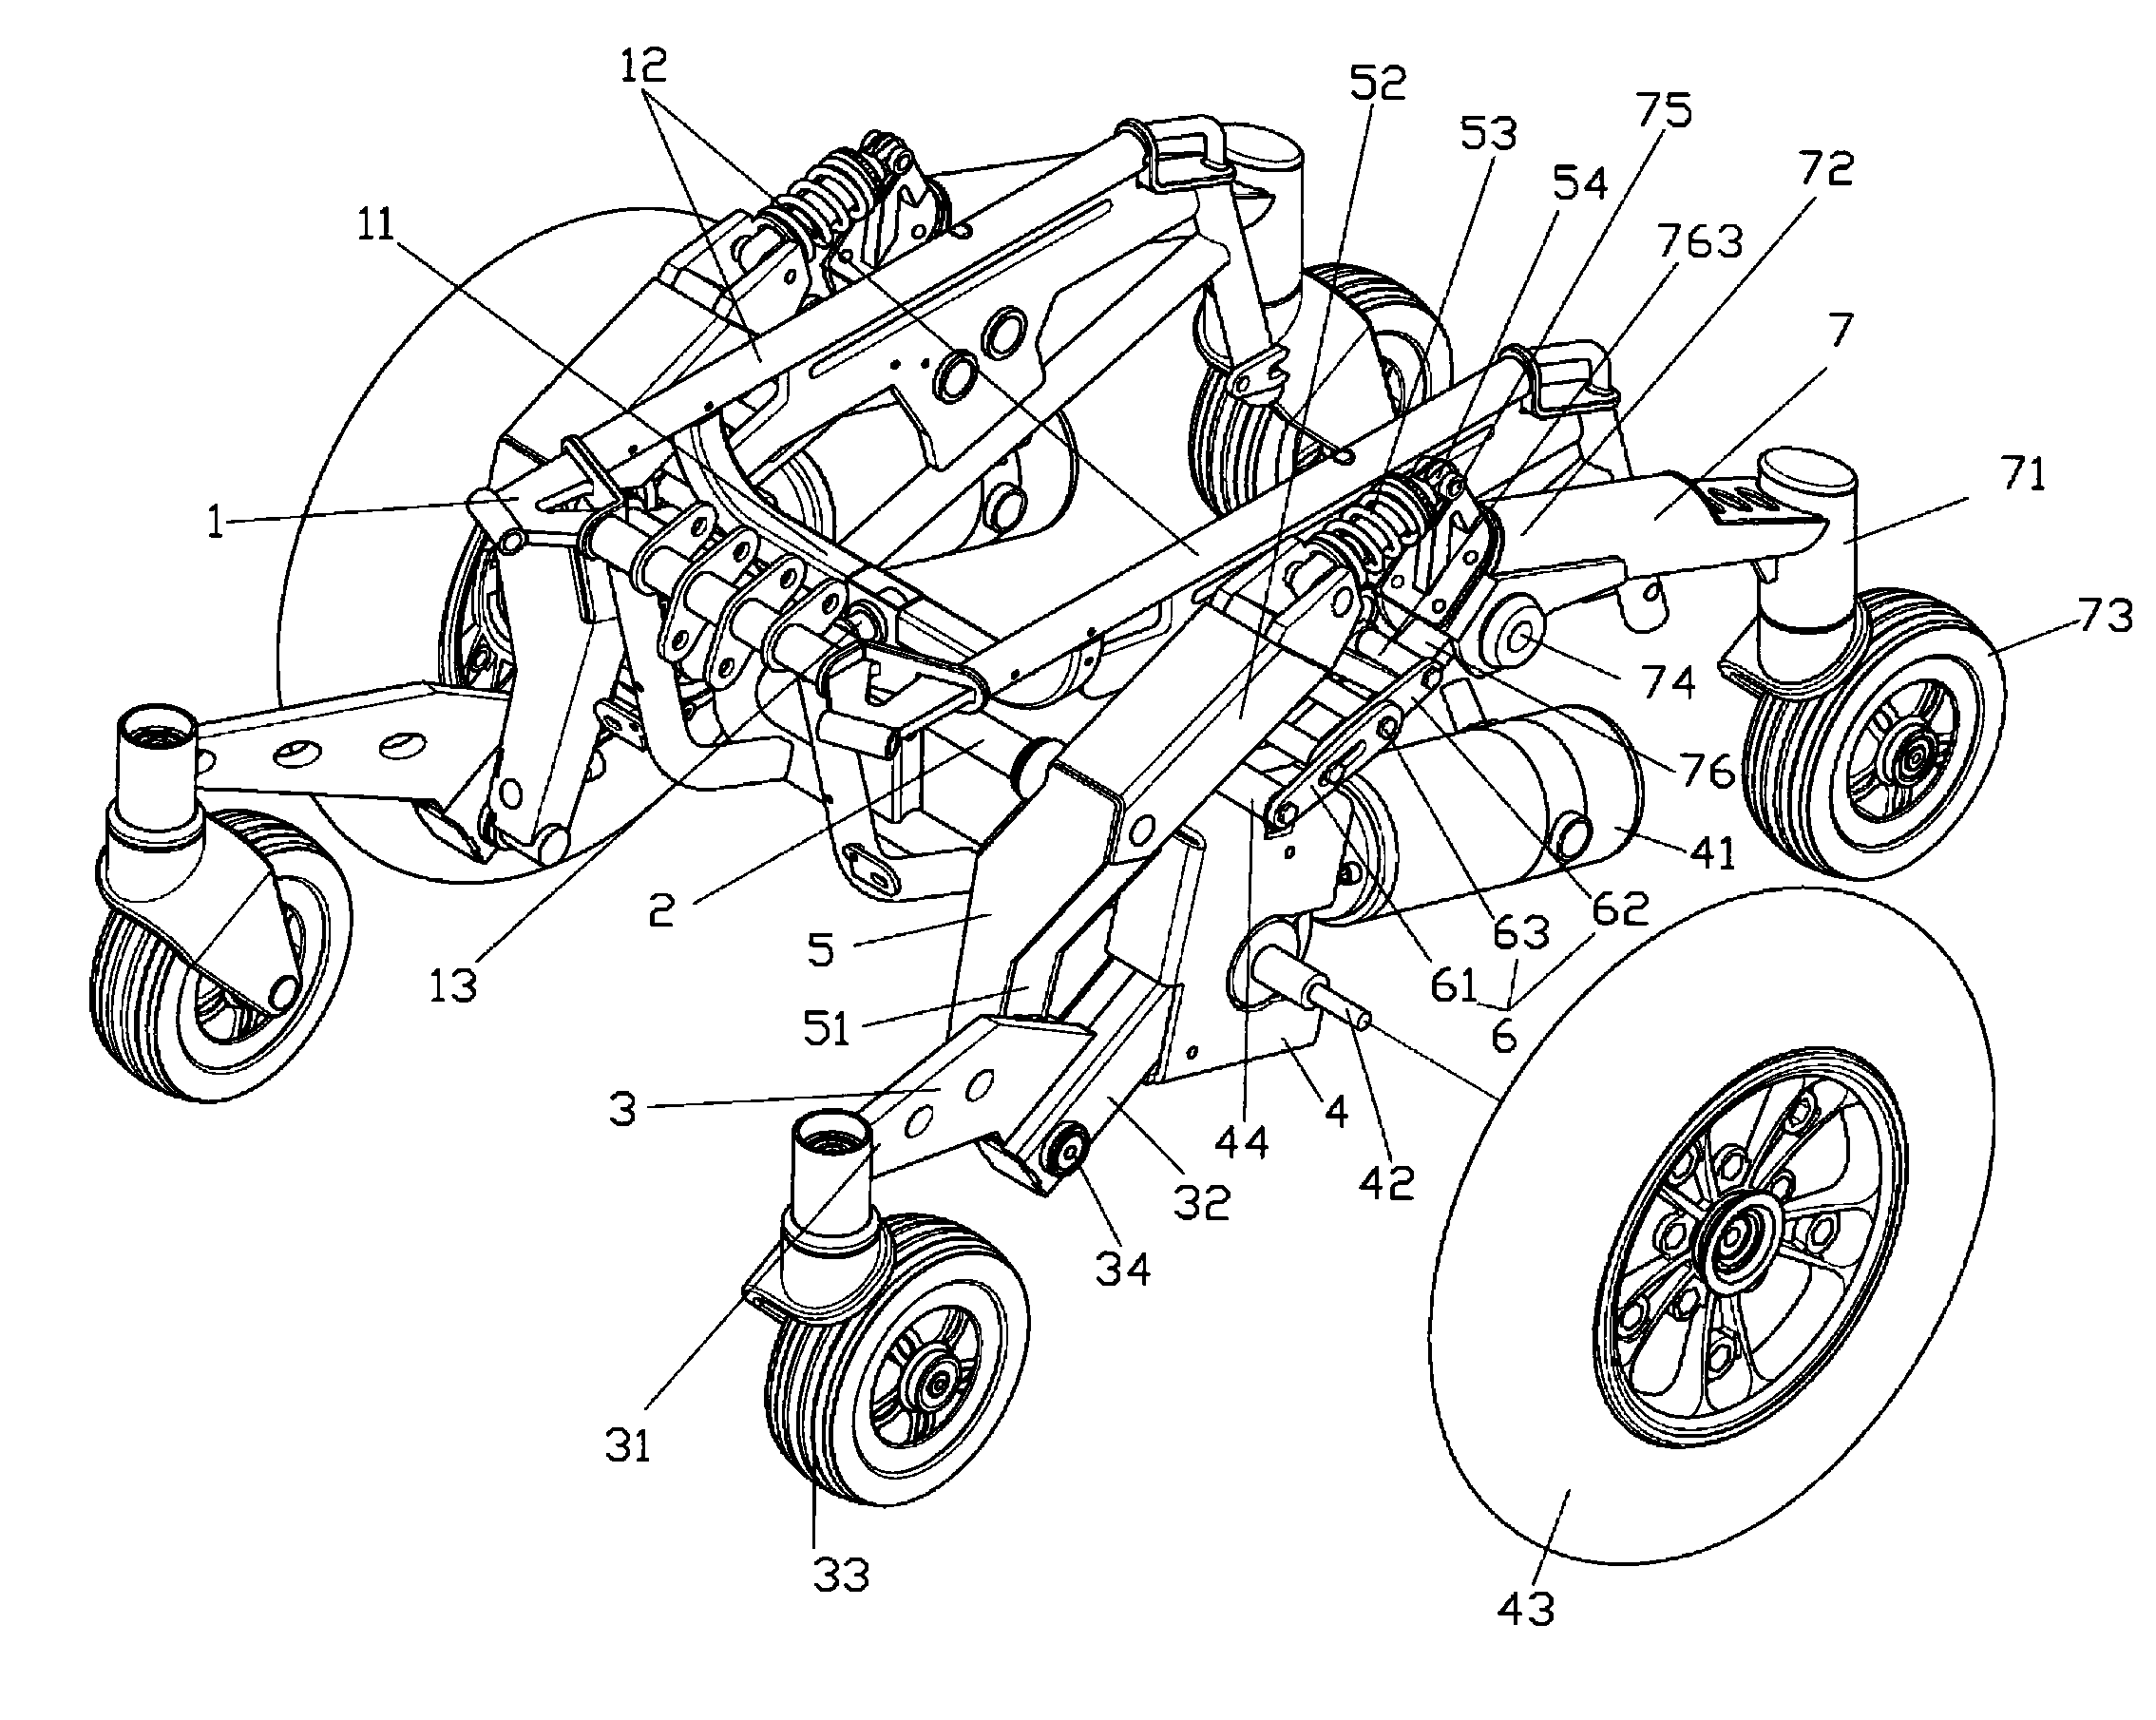 Chassis structure for mid-wheel drive power wheelchair